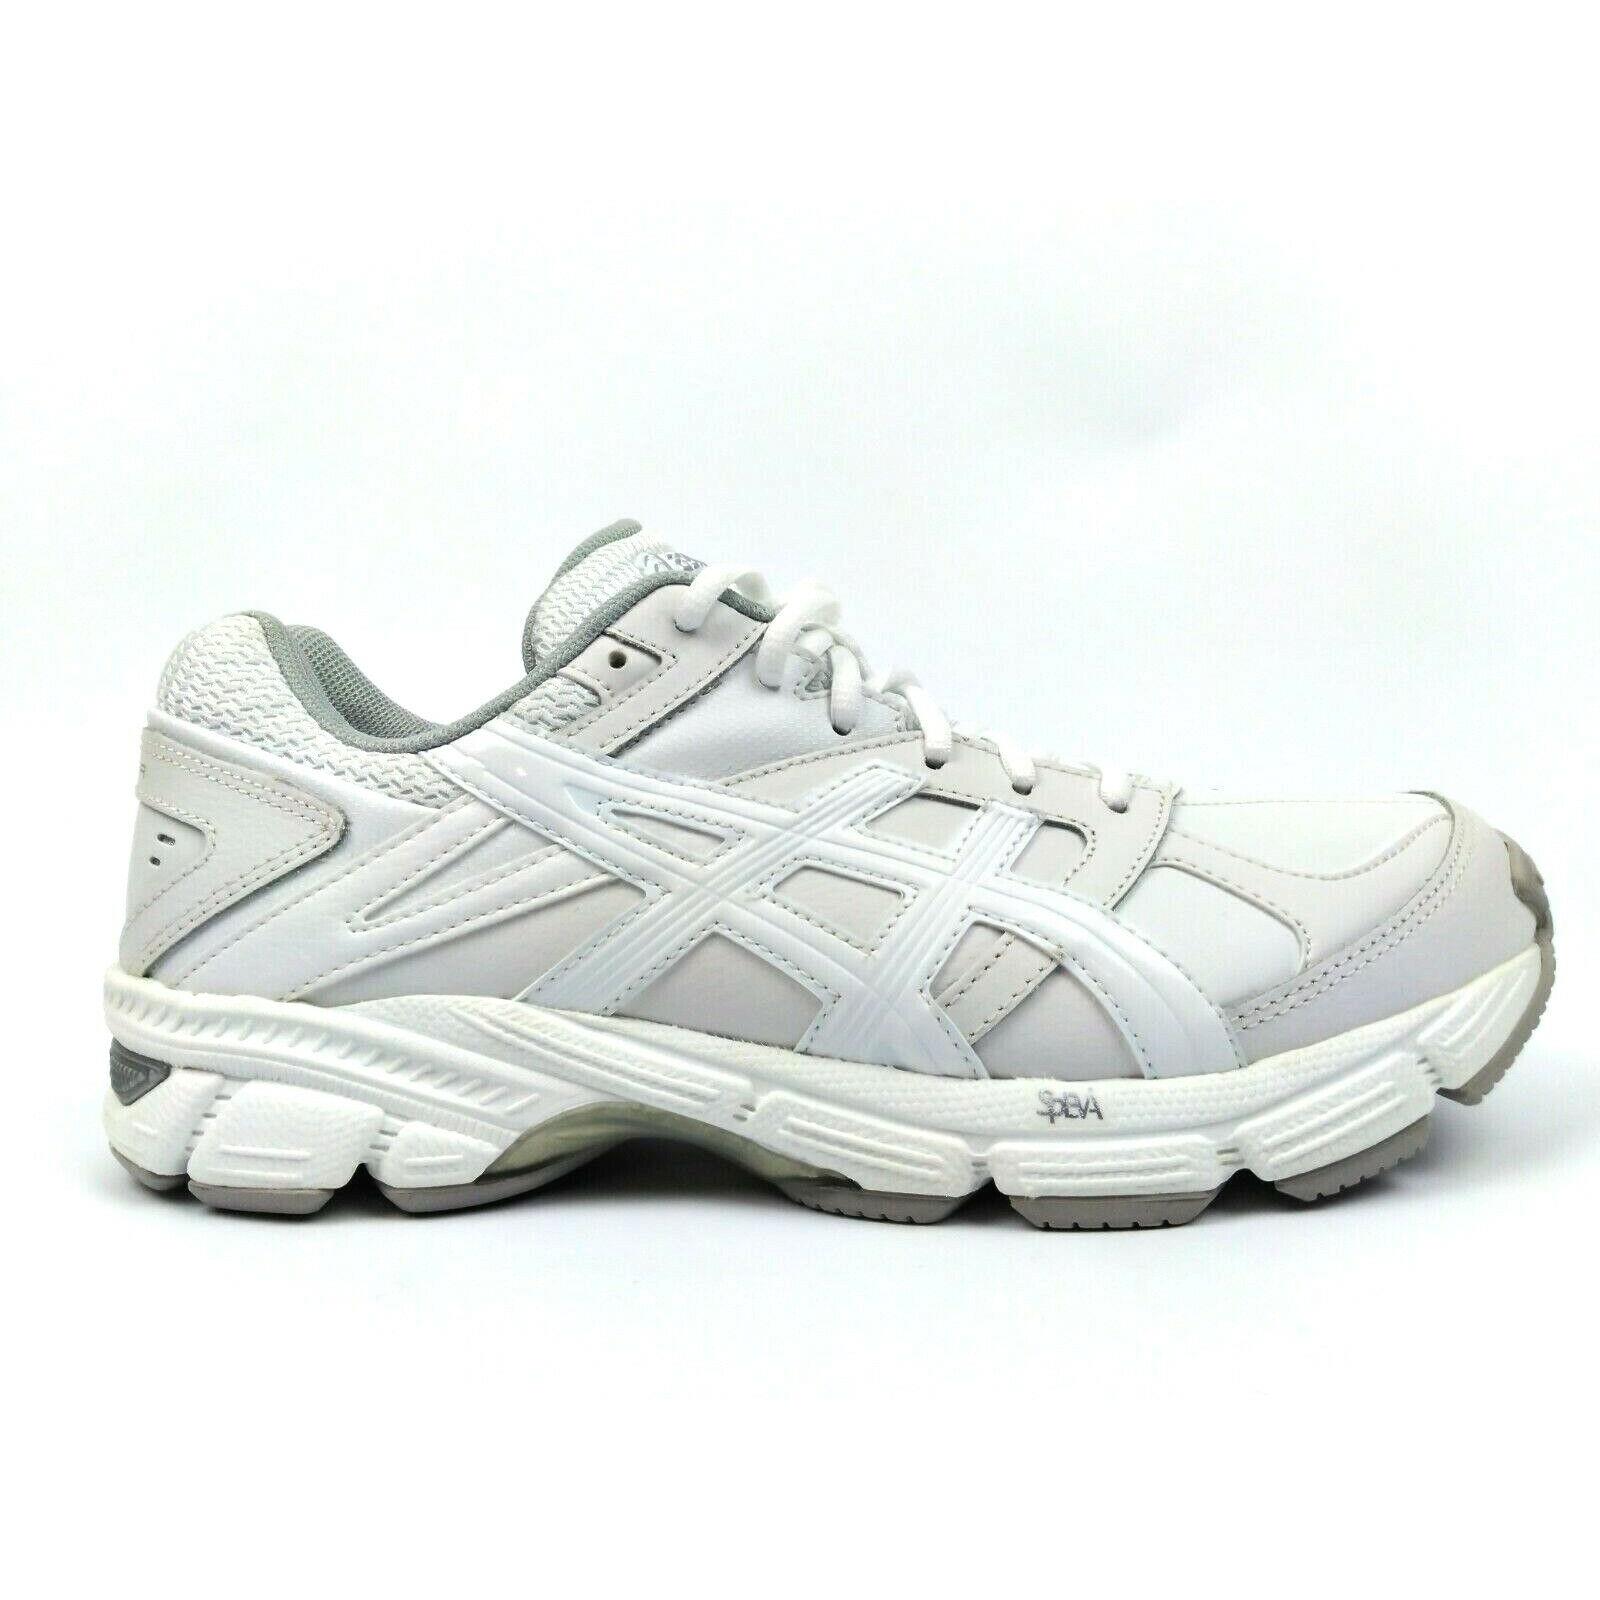 Asics Women`s GEL-190 Lightweight Lace Up Cross Training Shoes White Silver